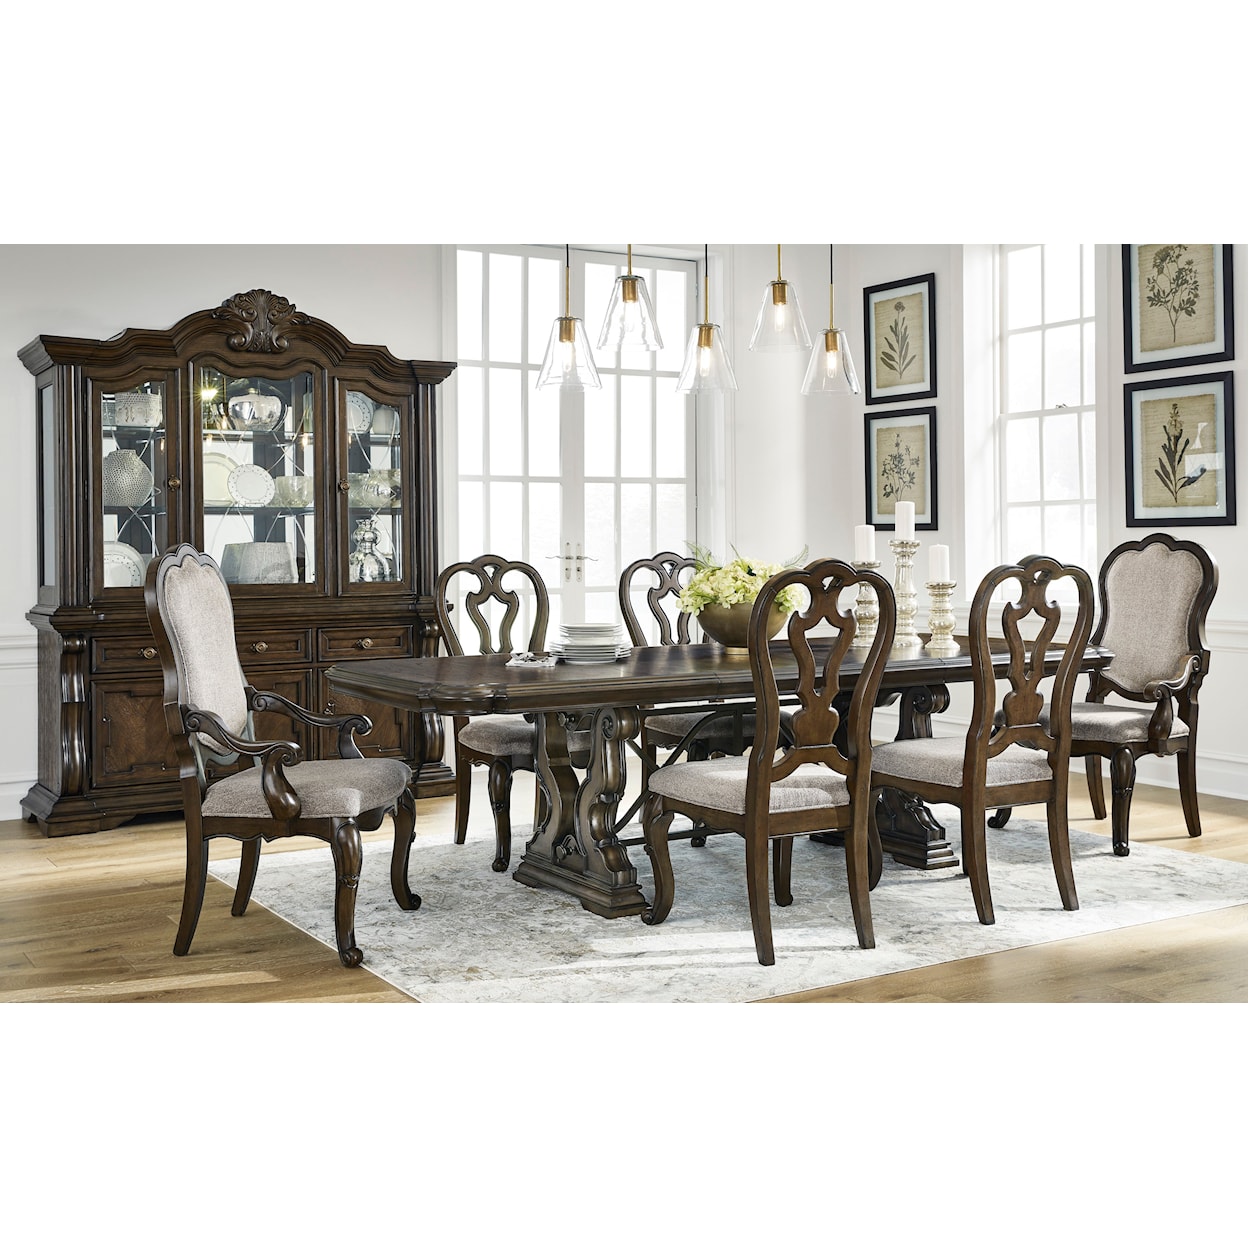 Signature Design by Ashley Maylee 6-Piece Dining Set